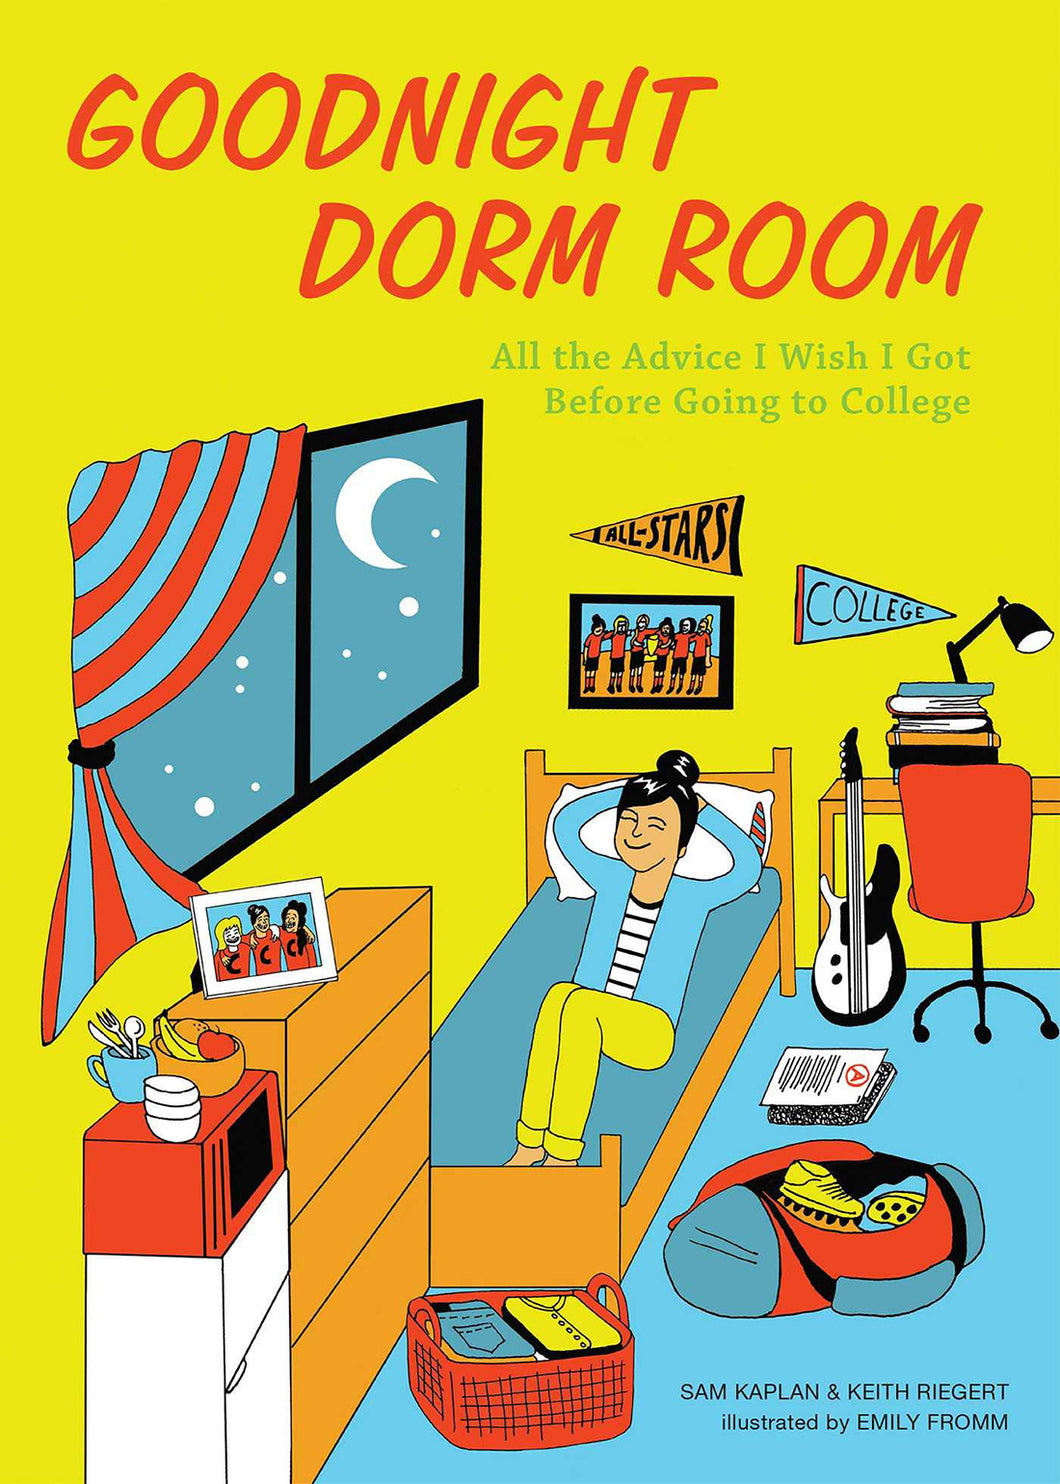 Goodnight Dorm Room: All the Advice I Wish I Got Before Going to College by Keith Riegert and Samuel Kaplan / Hardcover or Paperback - NEW BOOK